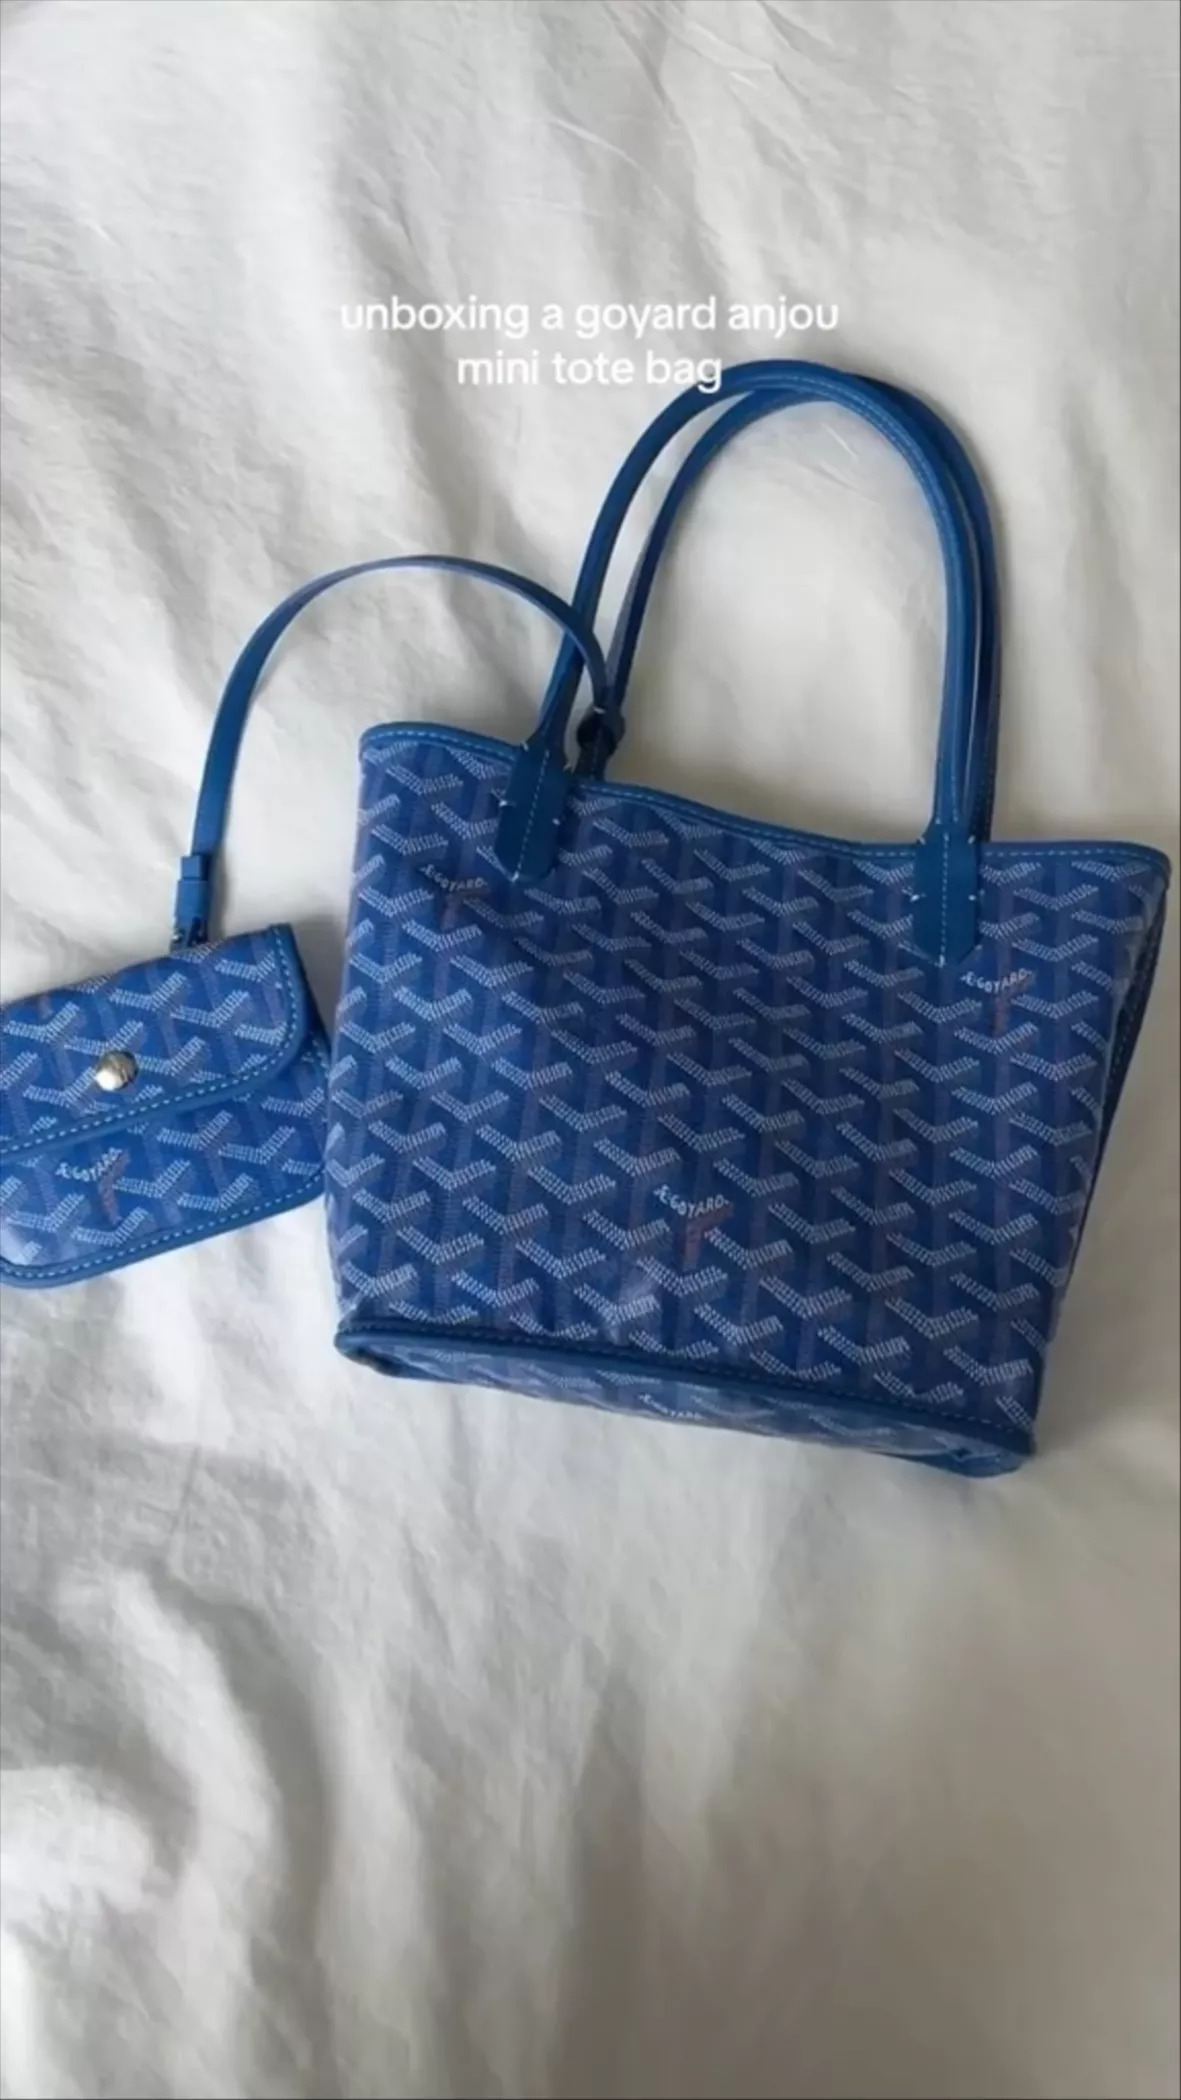 Run and get this bag ladies it is literally the cutest thing ever and , goyard dhgate